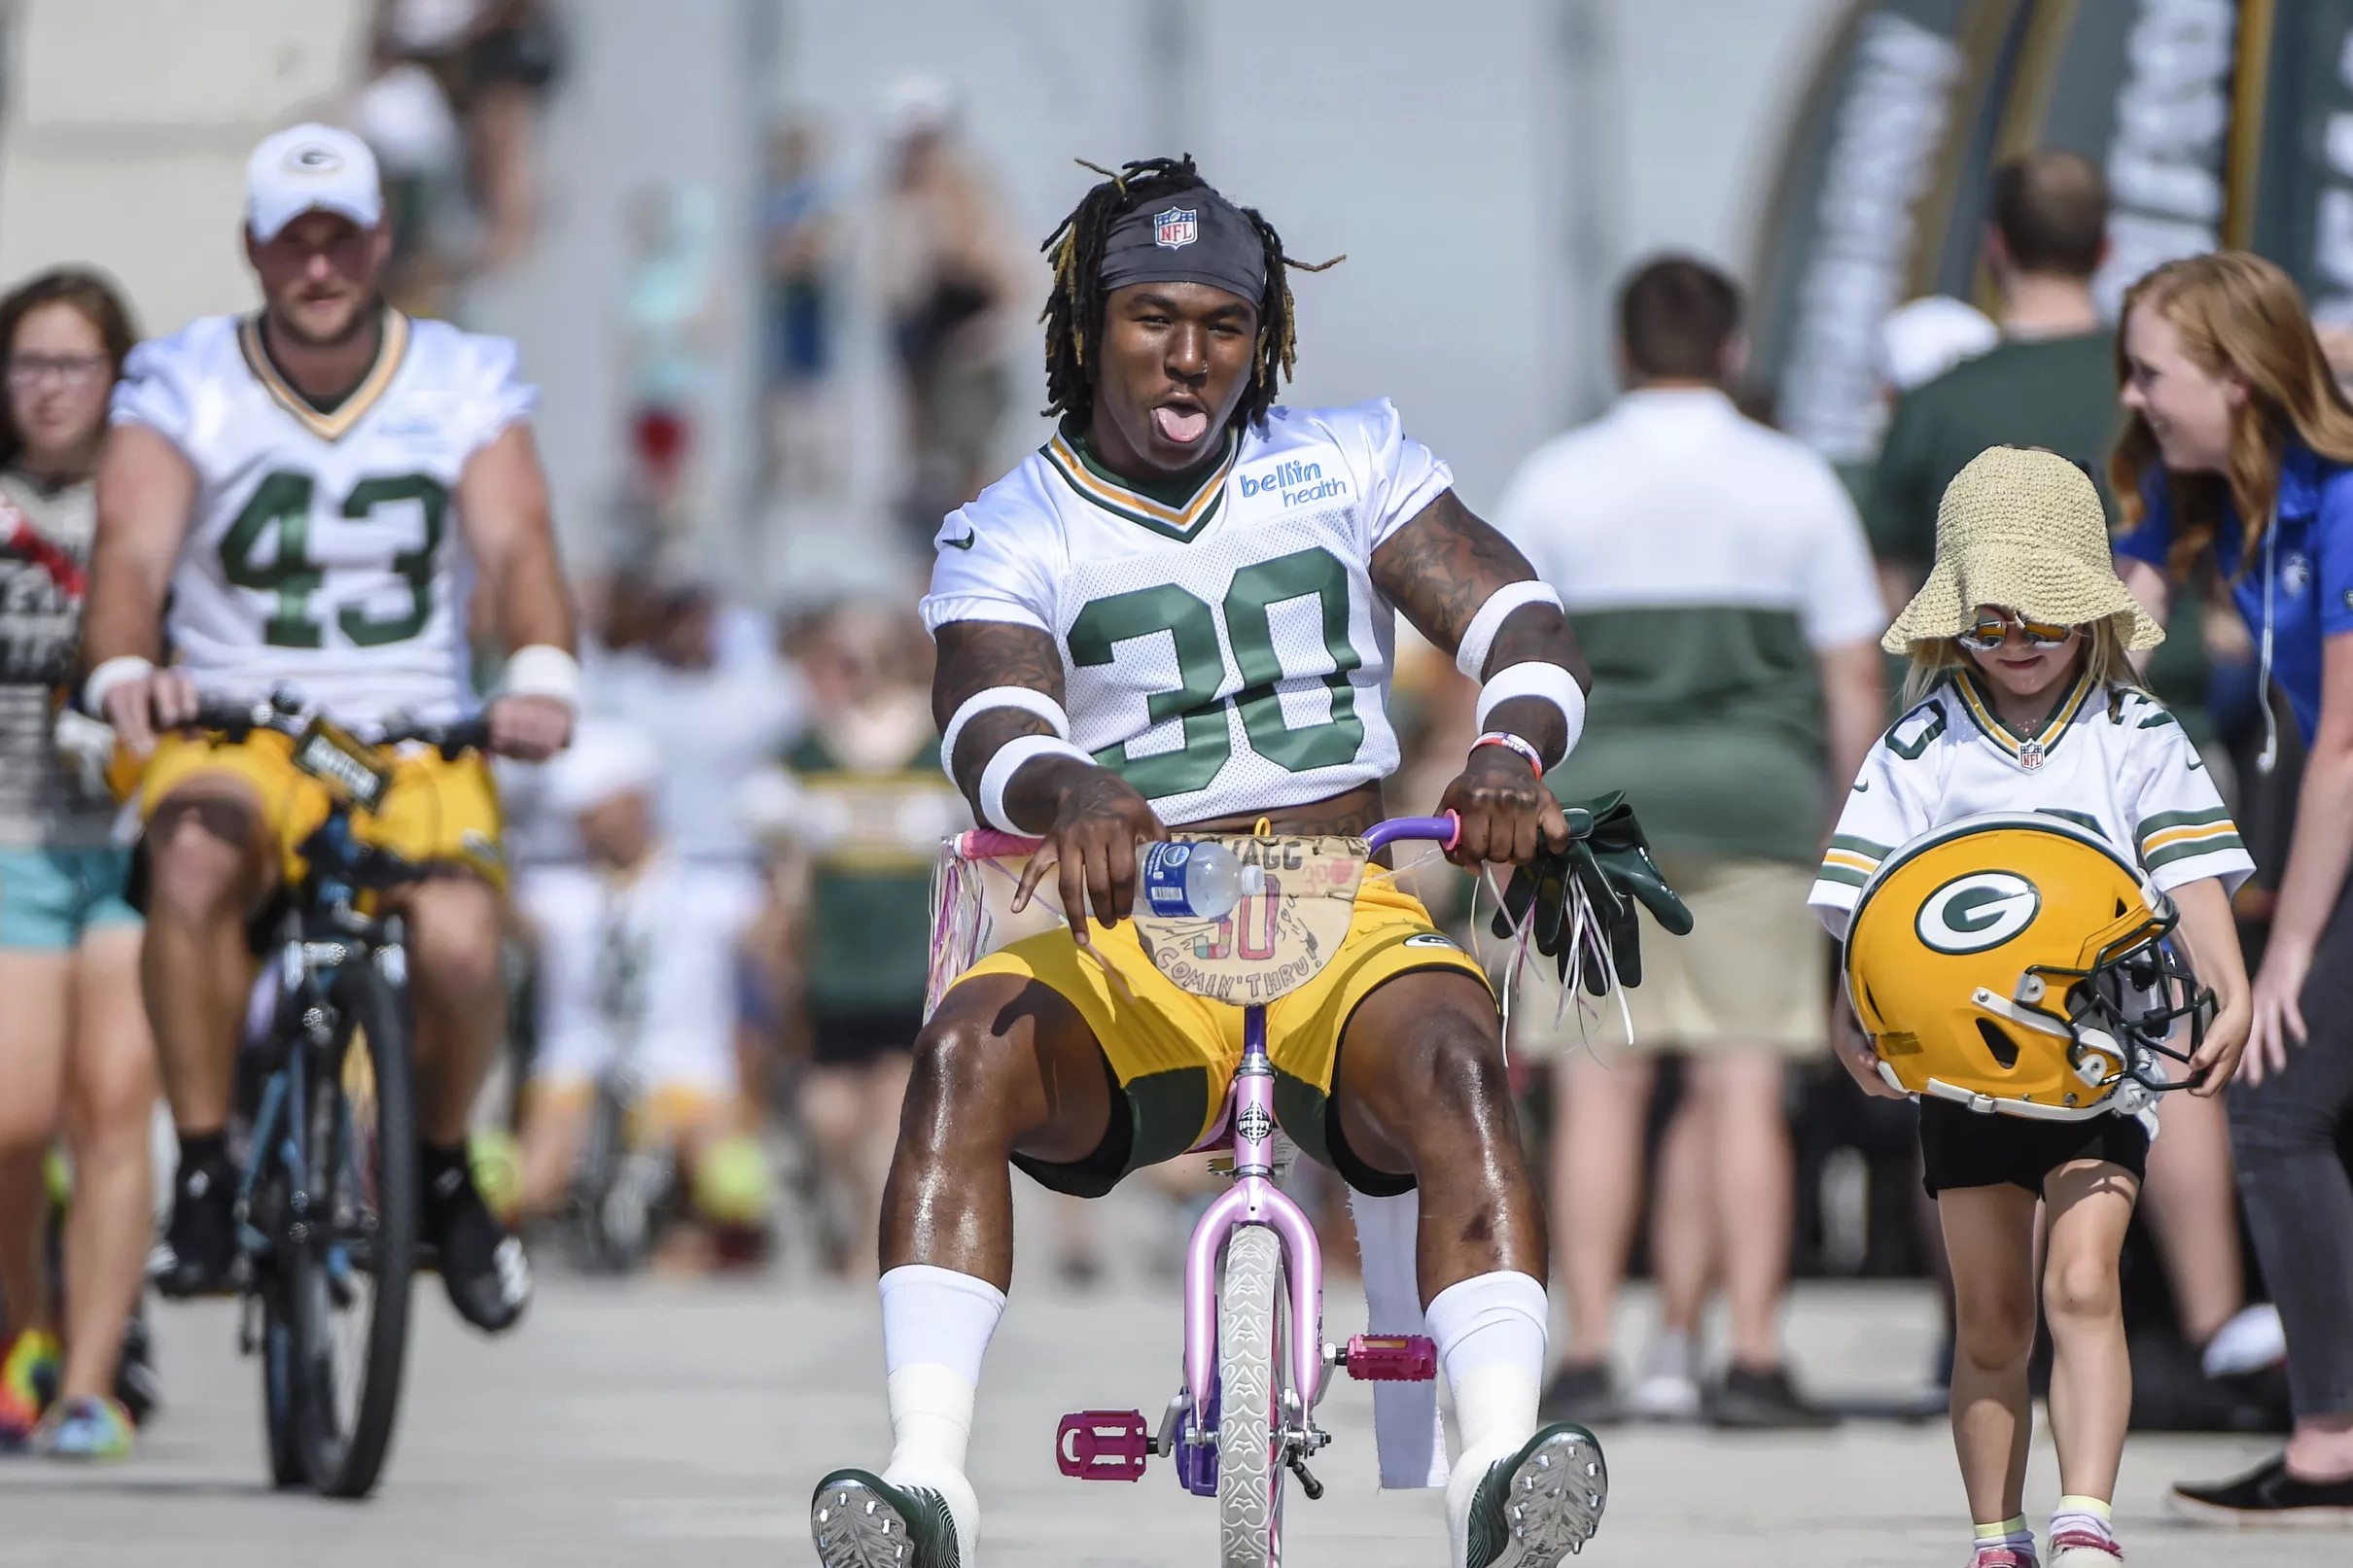 Packers training camp 2019 - August 19th live practice updates